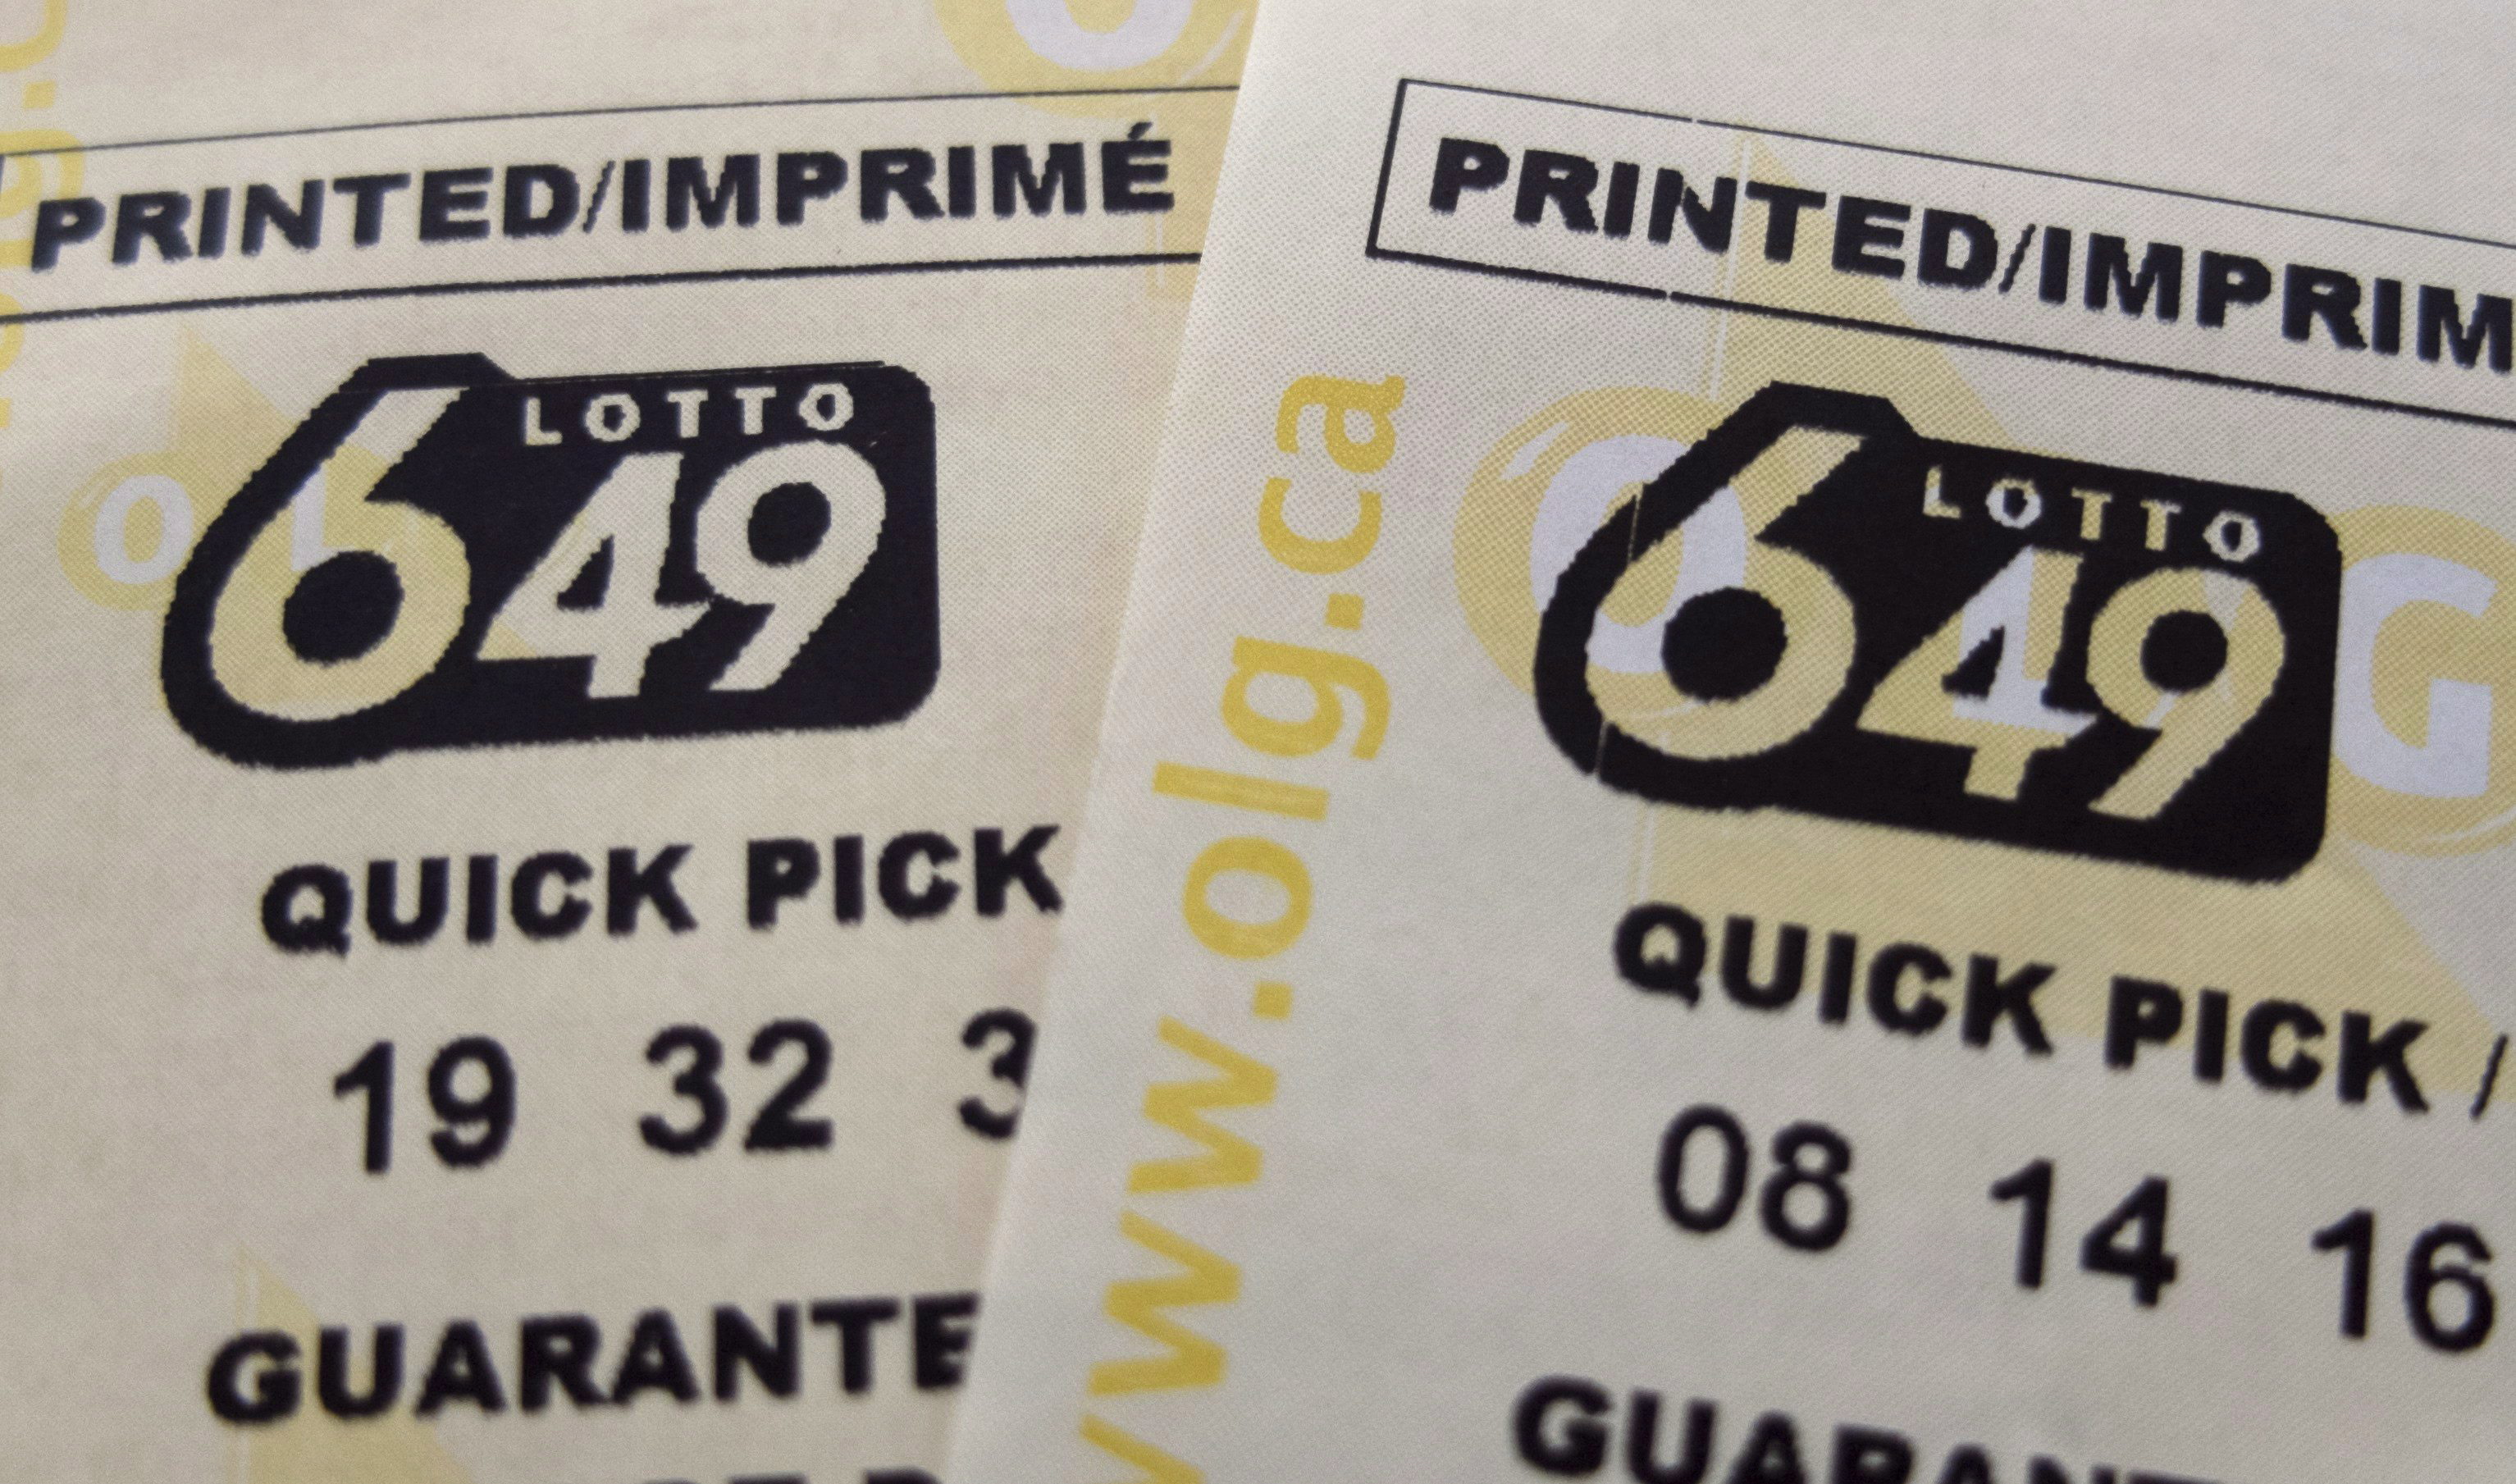 lotto 649 previous numbers